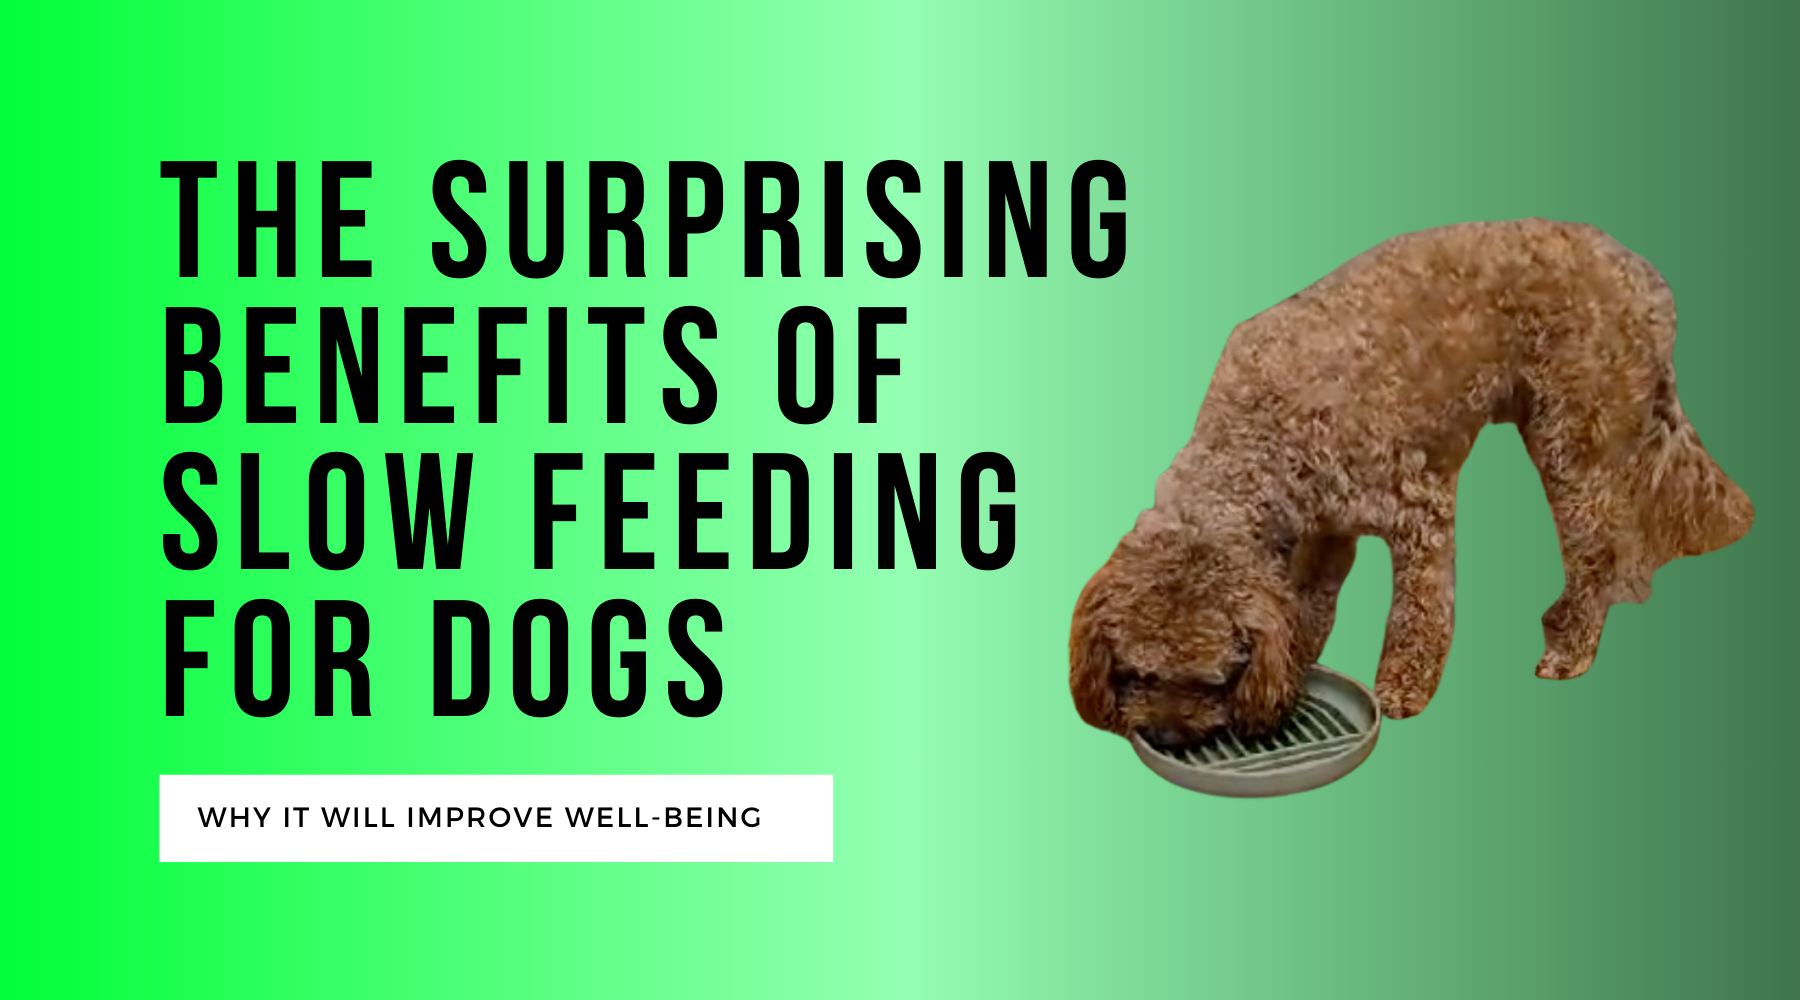 The Surprising Benefits of Slow Feeding for Dogs